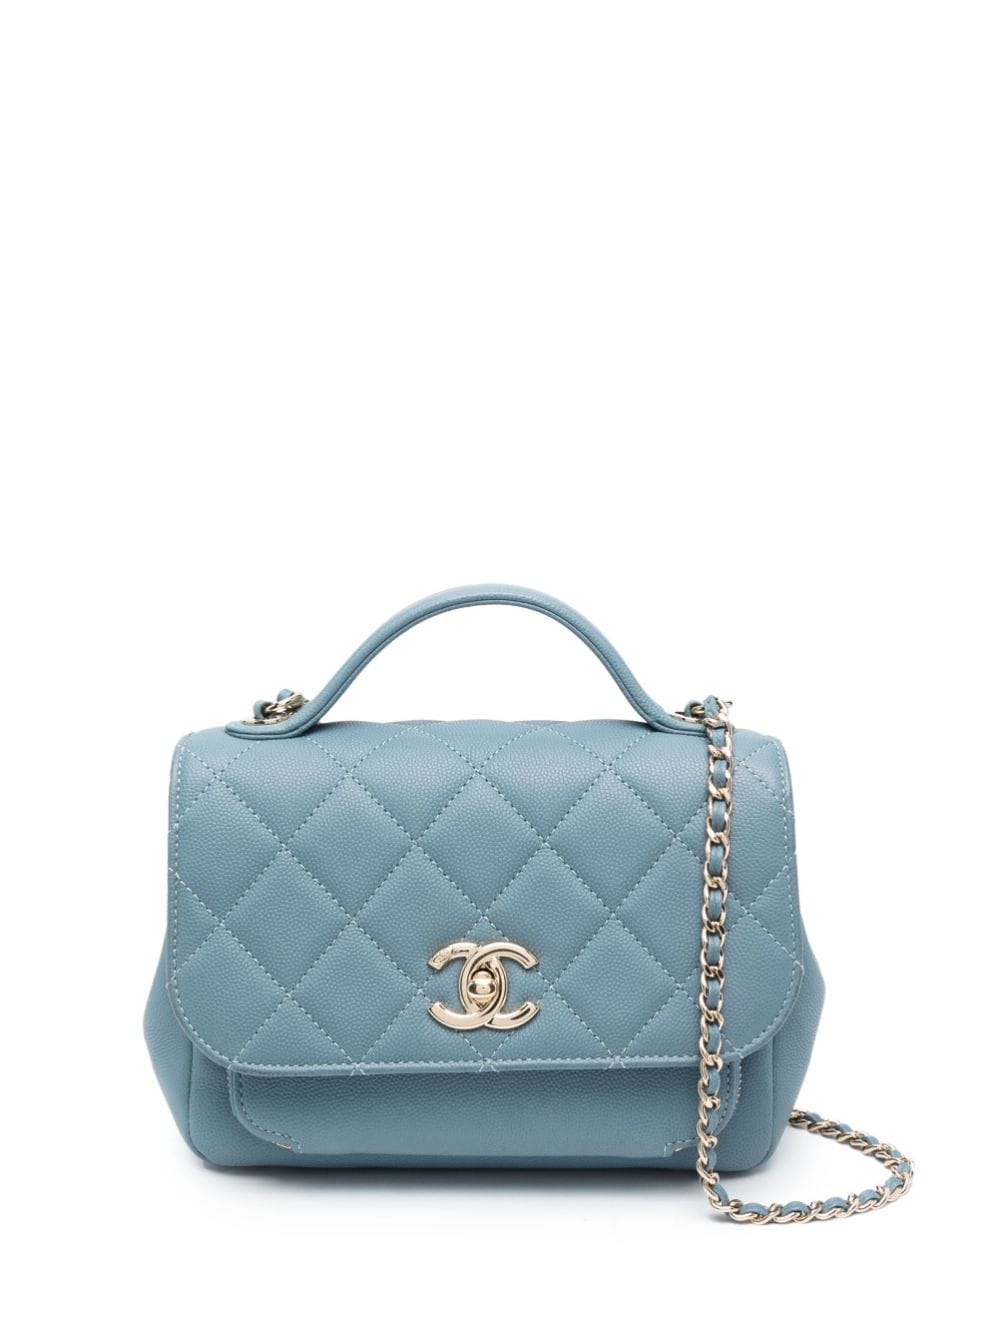 Chanel Small Business Affinity Flap Bag - Grey Shoulder Bags